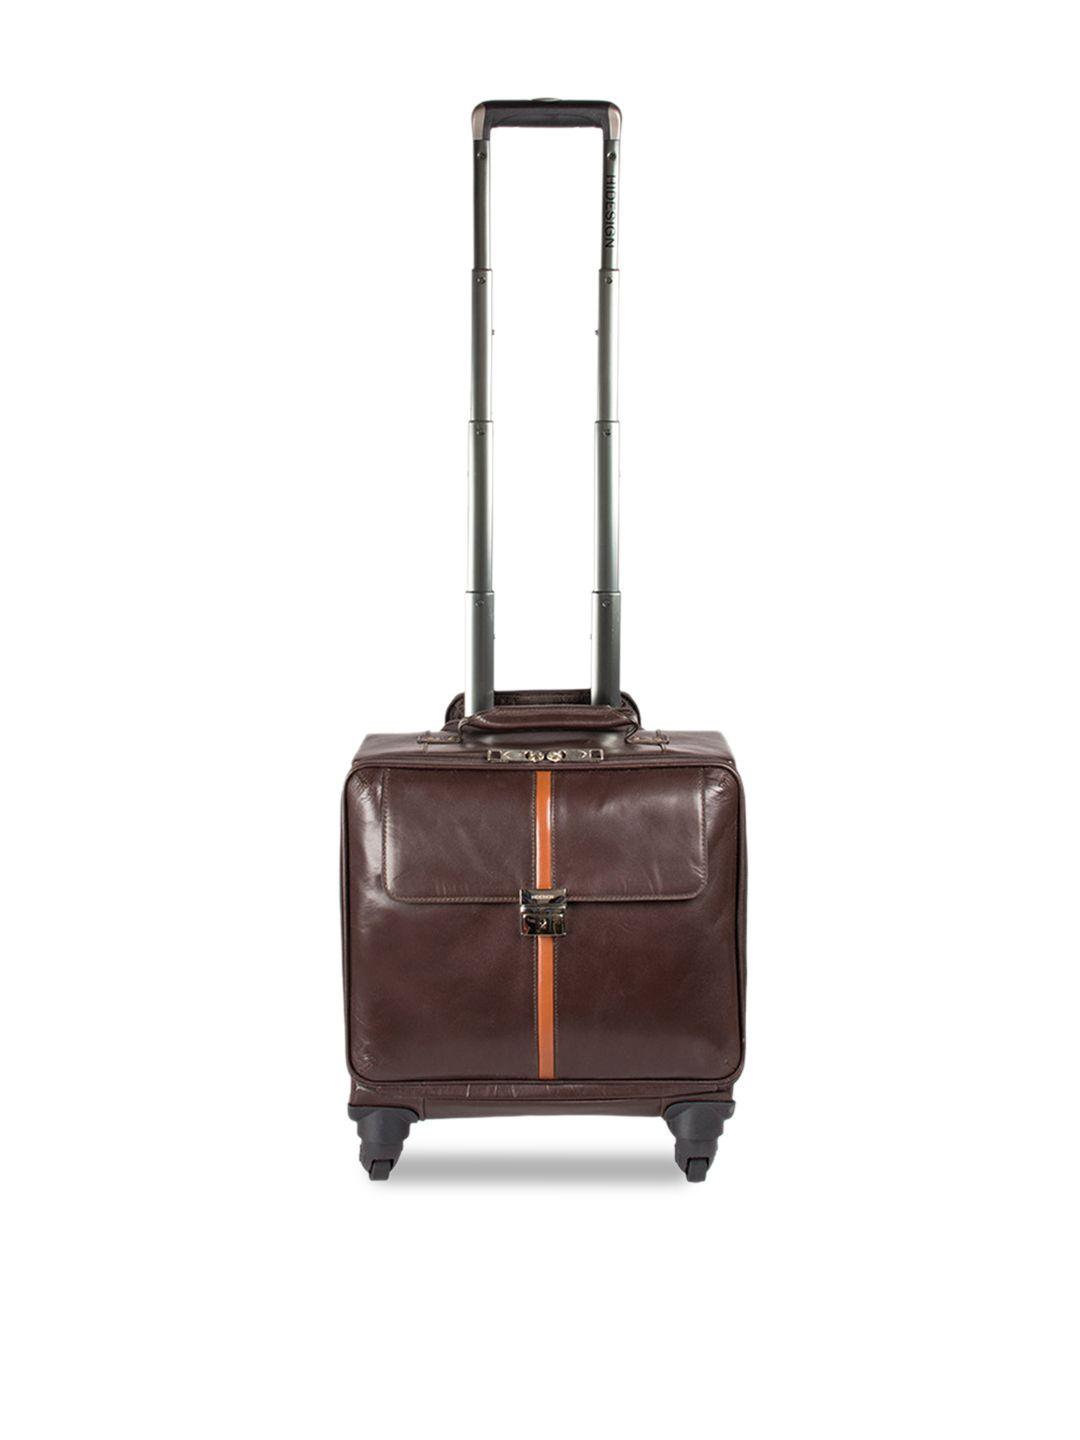 hidesign unisex brown solid cabin trolley suitcase